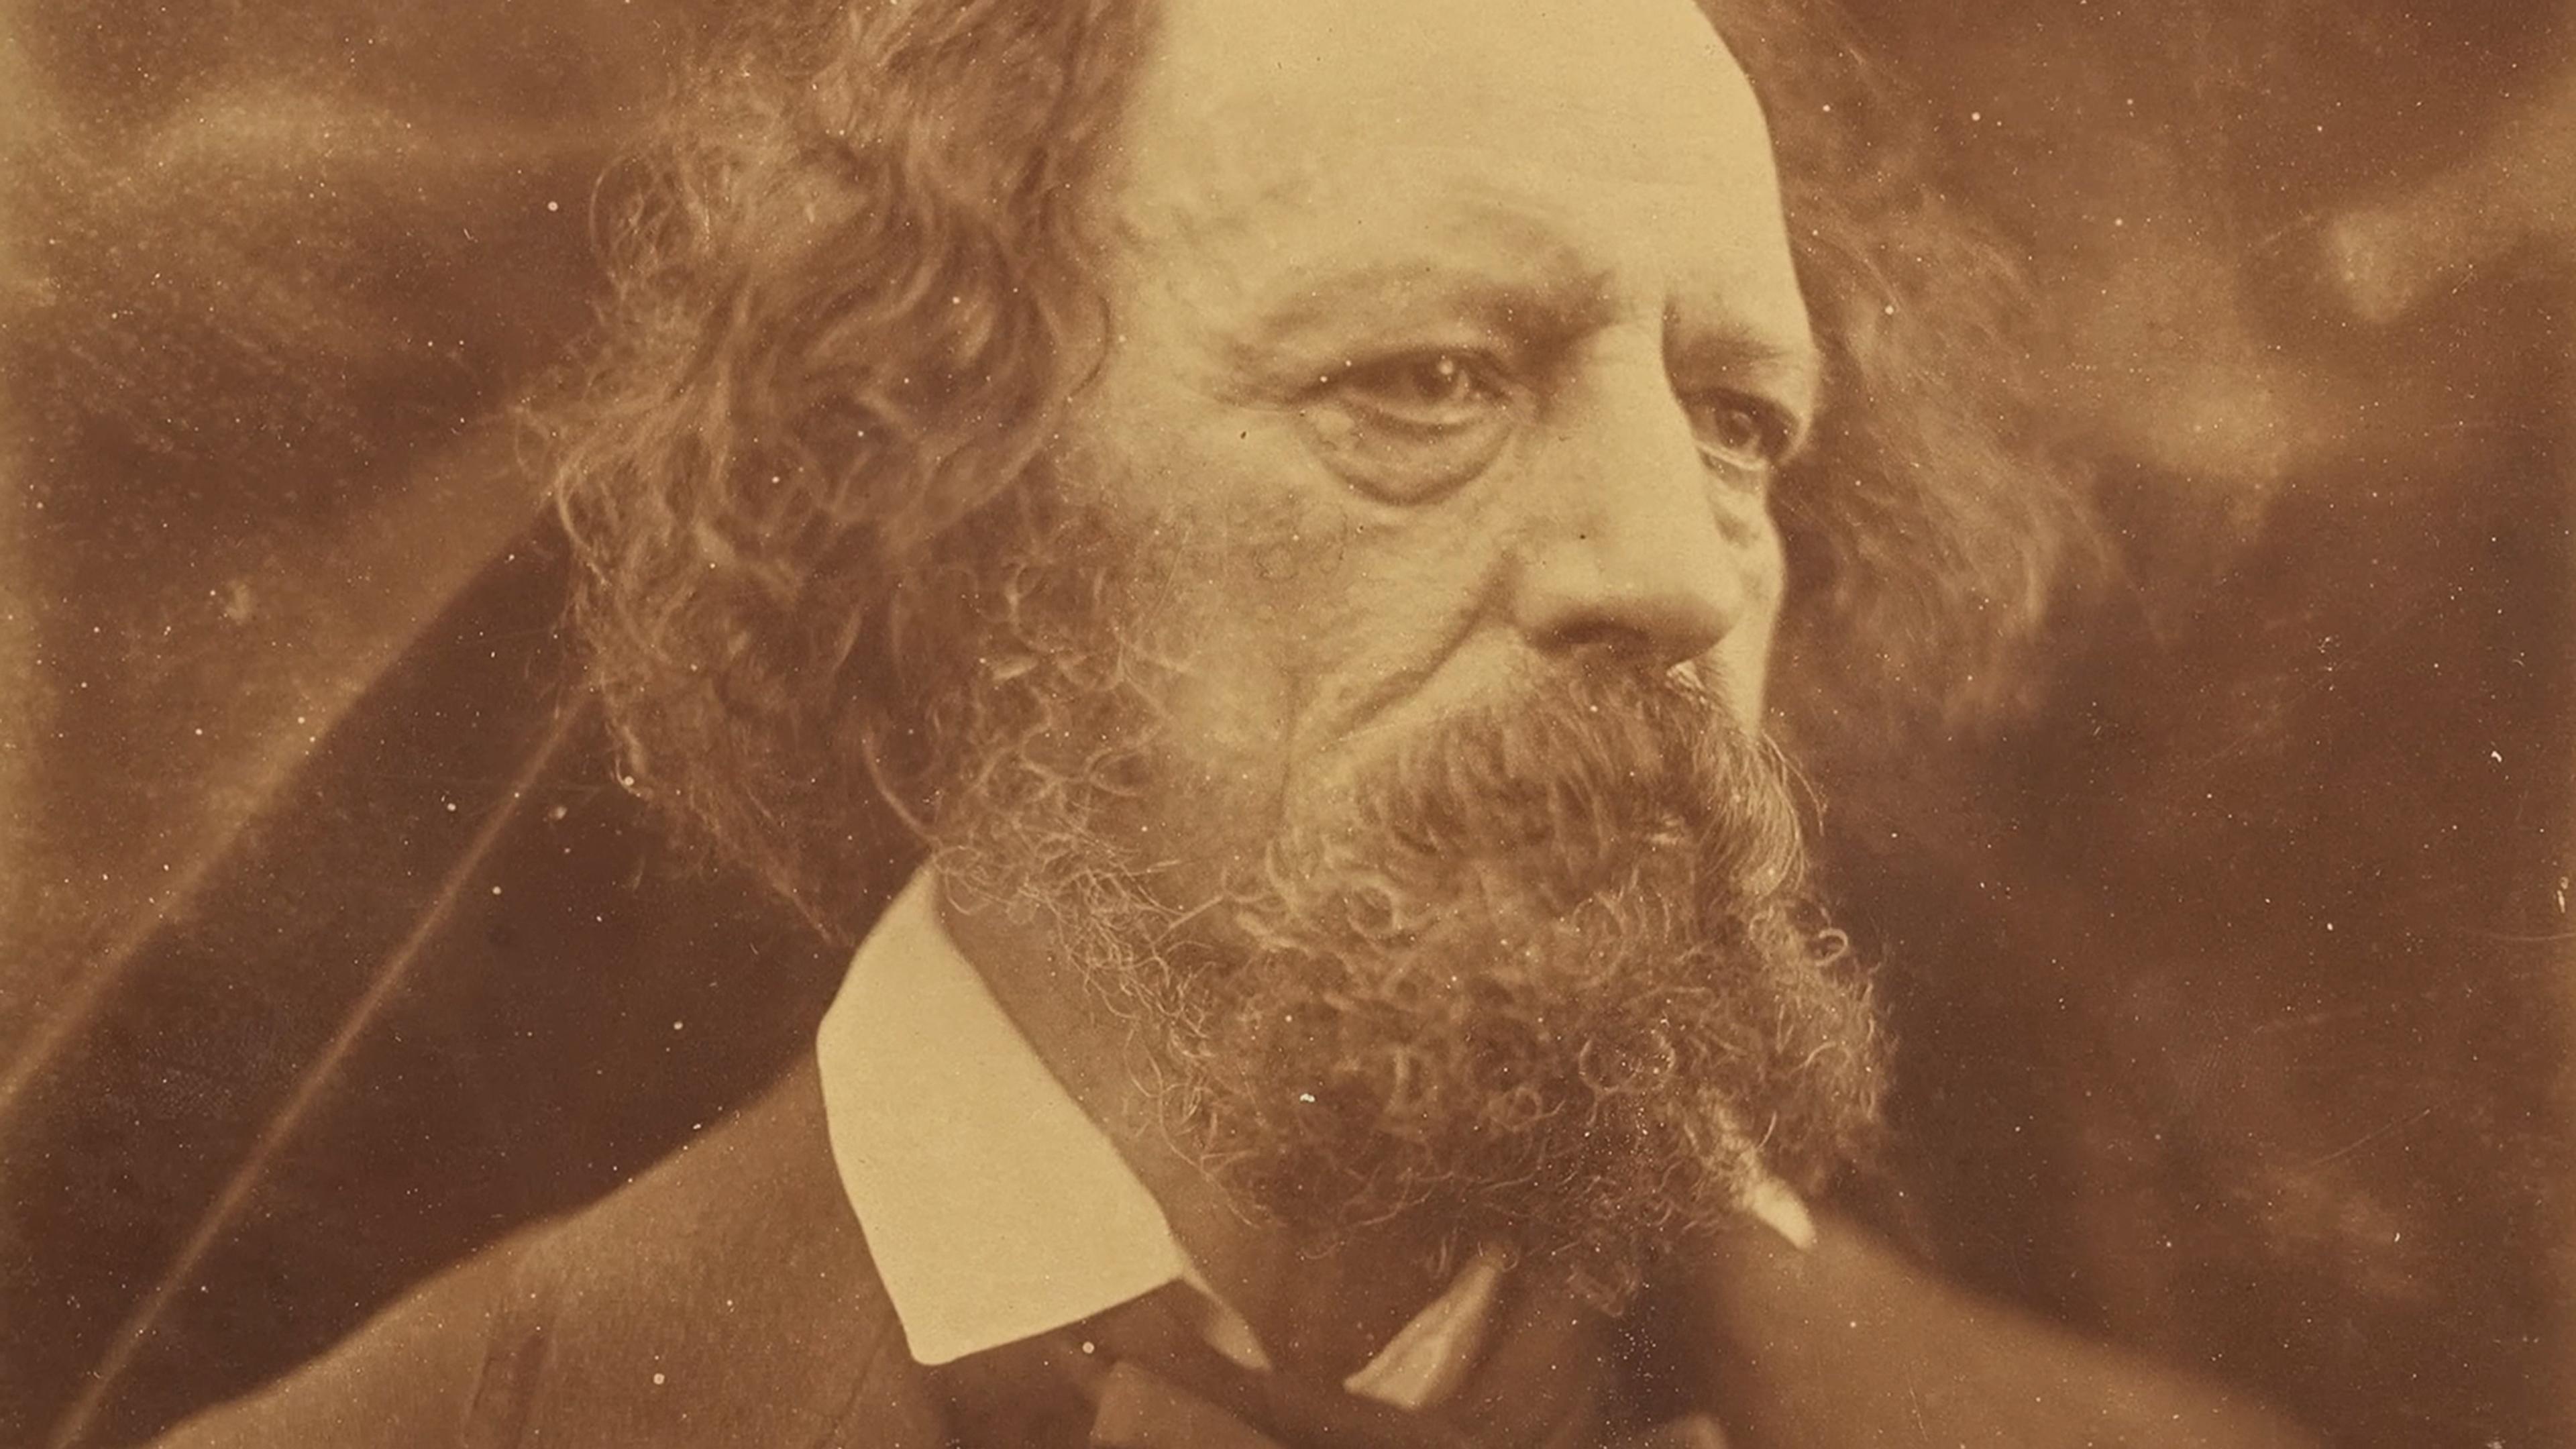 Sepia photograph of an older man with long curly hair and a full beard and moustache, wearing a white shirt with a dark suit. His expression appears thoughtful, and he is looking slightly to his right.